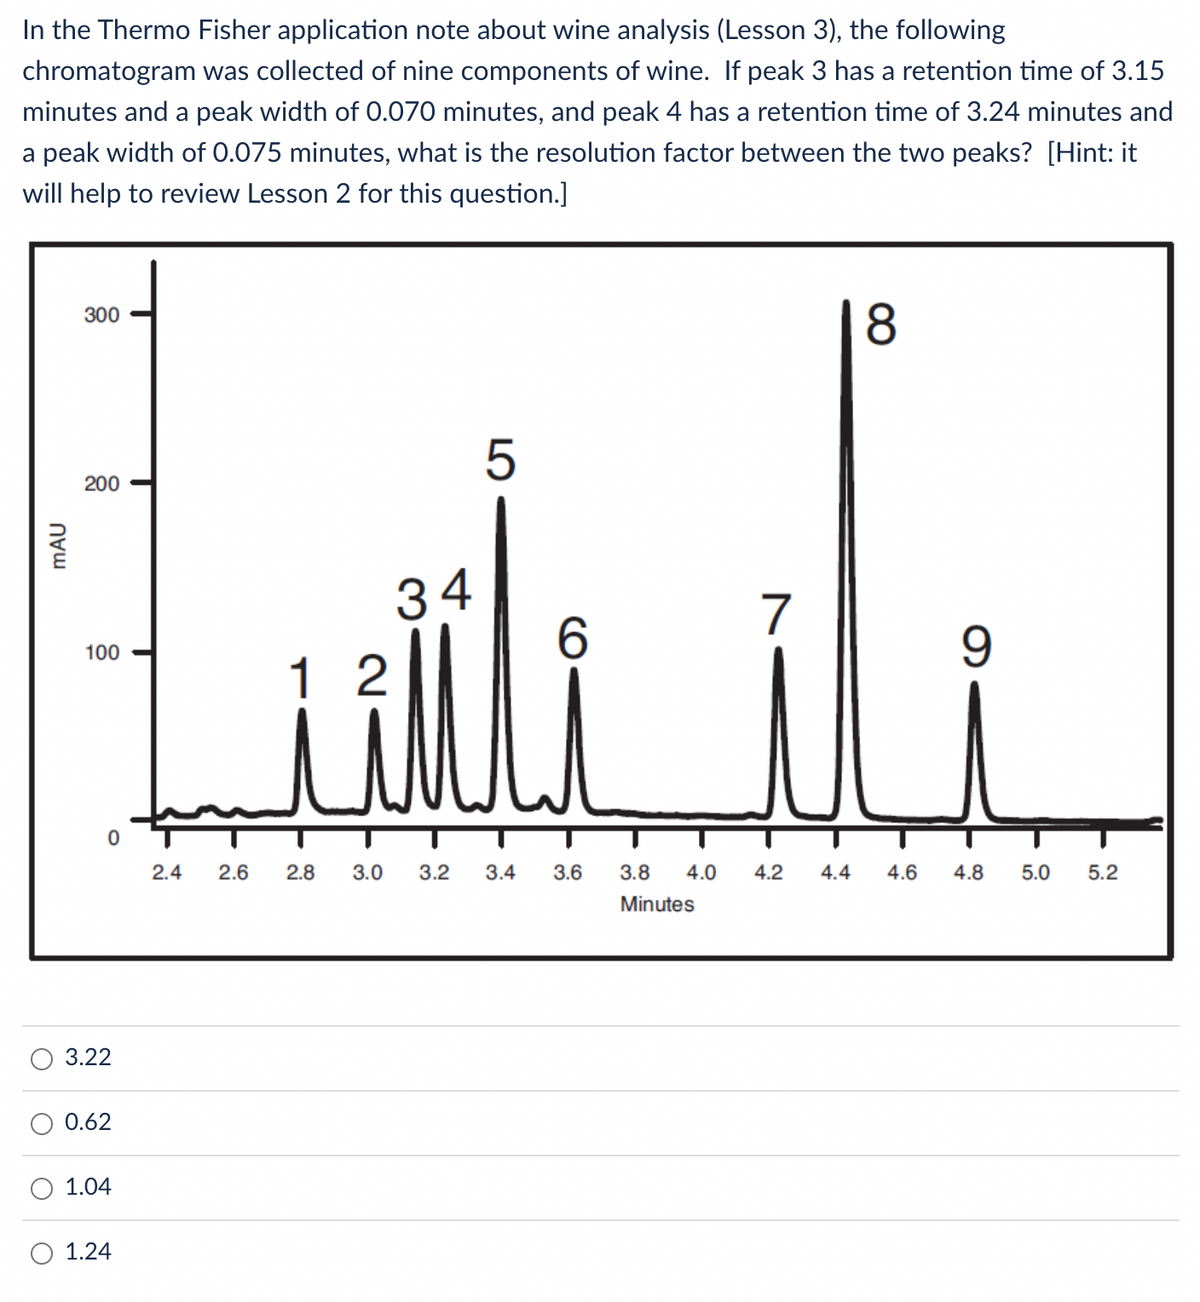 In the Thermo Fisher application note about wine analysis (Lesson 3), the following
chromatogram was collected of nine components of wine. If peak 3 has a retention time of 3.15
minutes and a peak width of 0.070 minutes, and peak 4 has a retention time of 3.24 minutes and
a peak width of 0.075 minutes, what is the resolution factor between the two peaks? [Hint: it
will help to review Lesson 2 for this question.]
mAU
300
200
100
0
3.22
0.62
1.04
1.24
2.4 2.6
2.8
LO
34
12
ww
3.0
5
3.2 3.4 3.6
3.8 4.0
Minutes
7
8
9
4.2 4.4 4.6 4.8 5.0
5.2